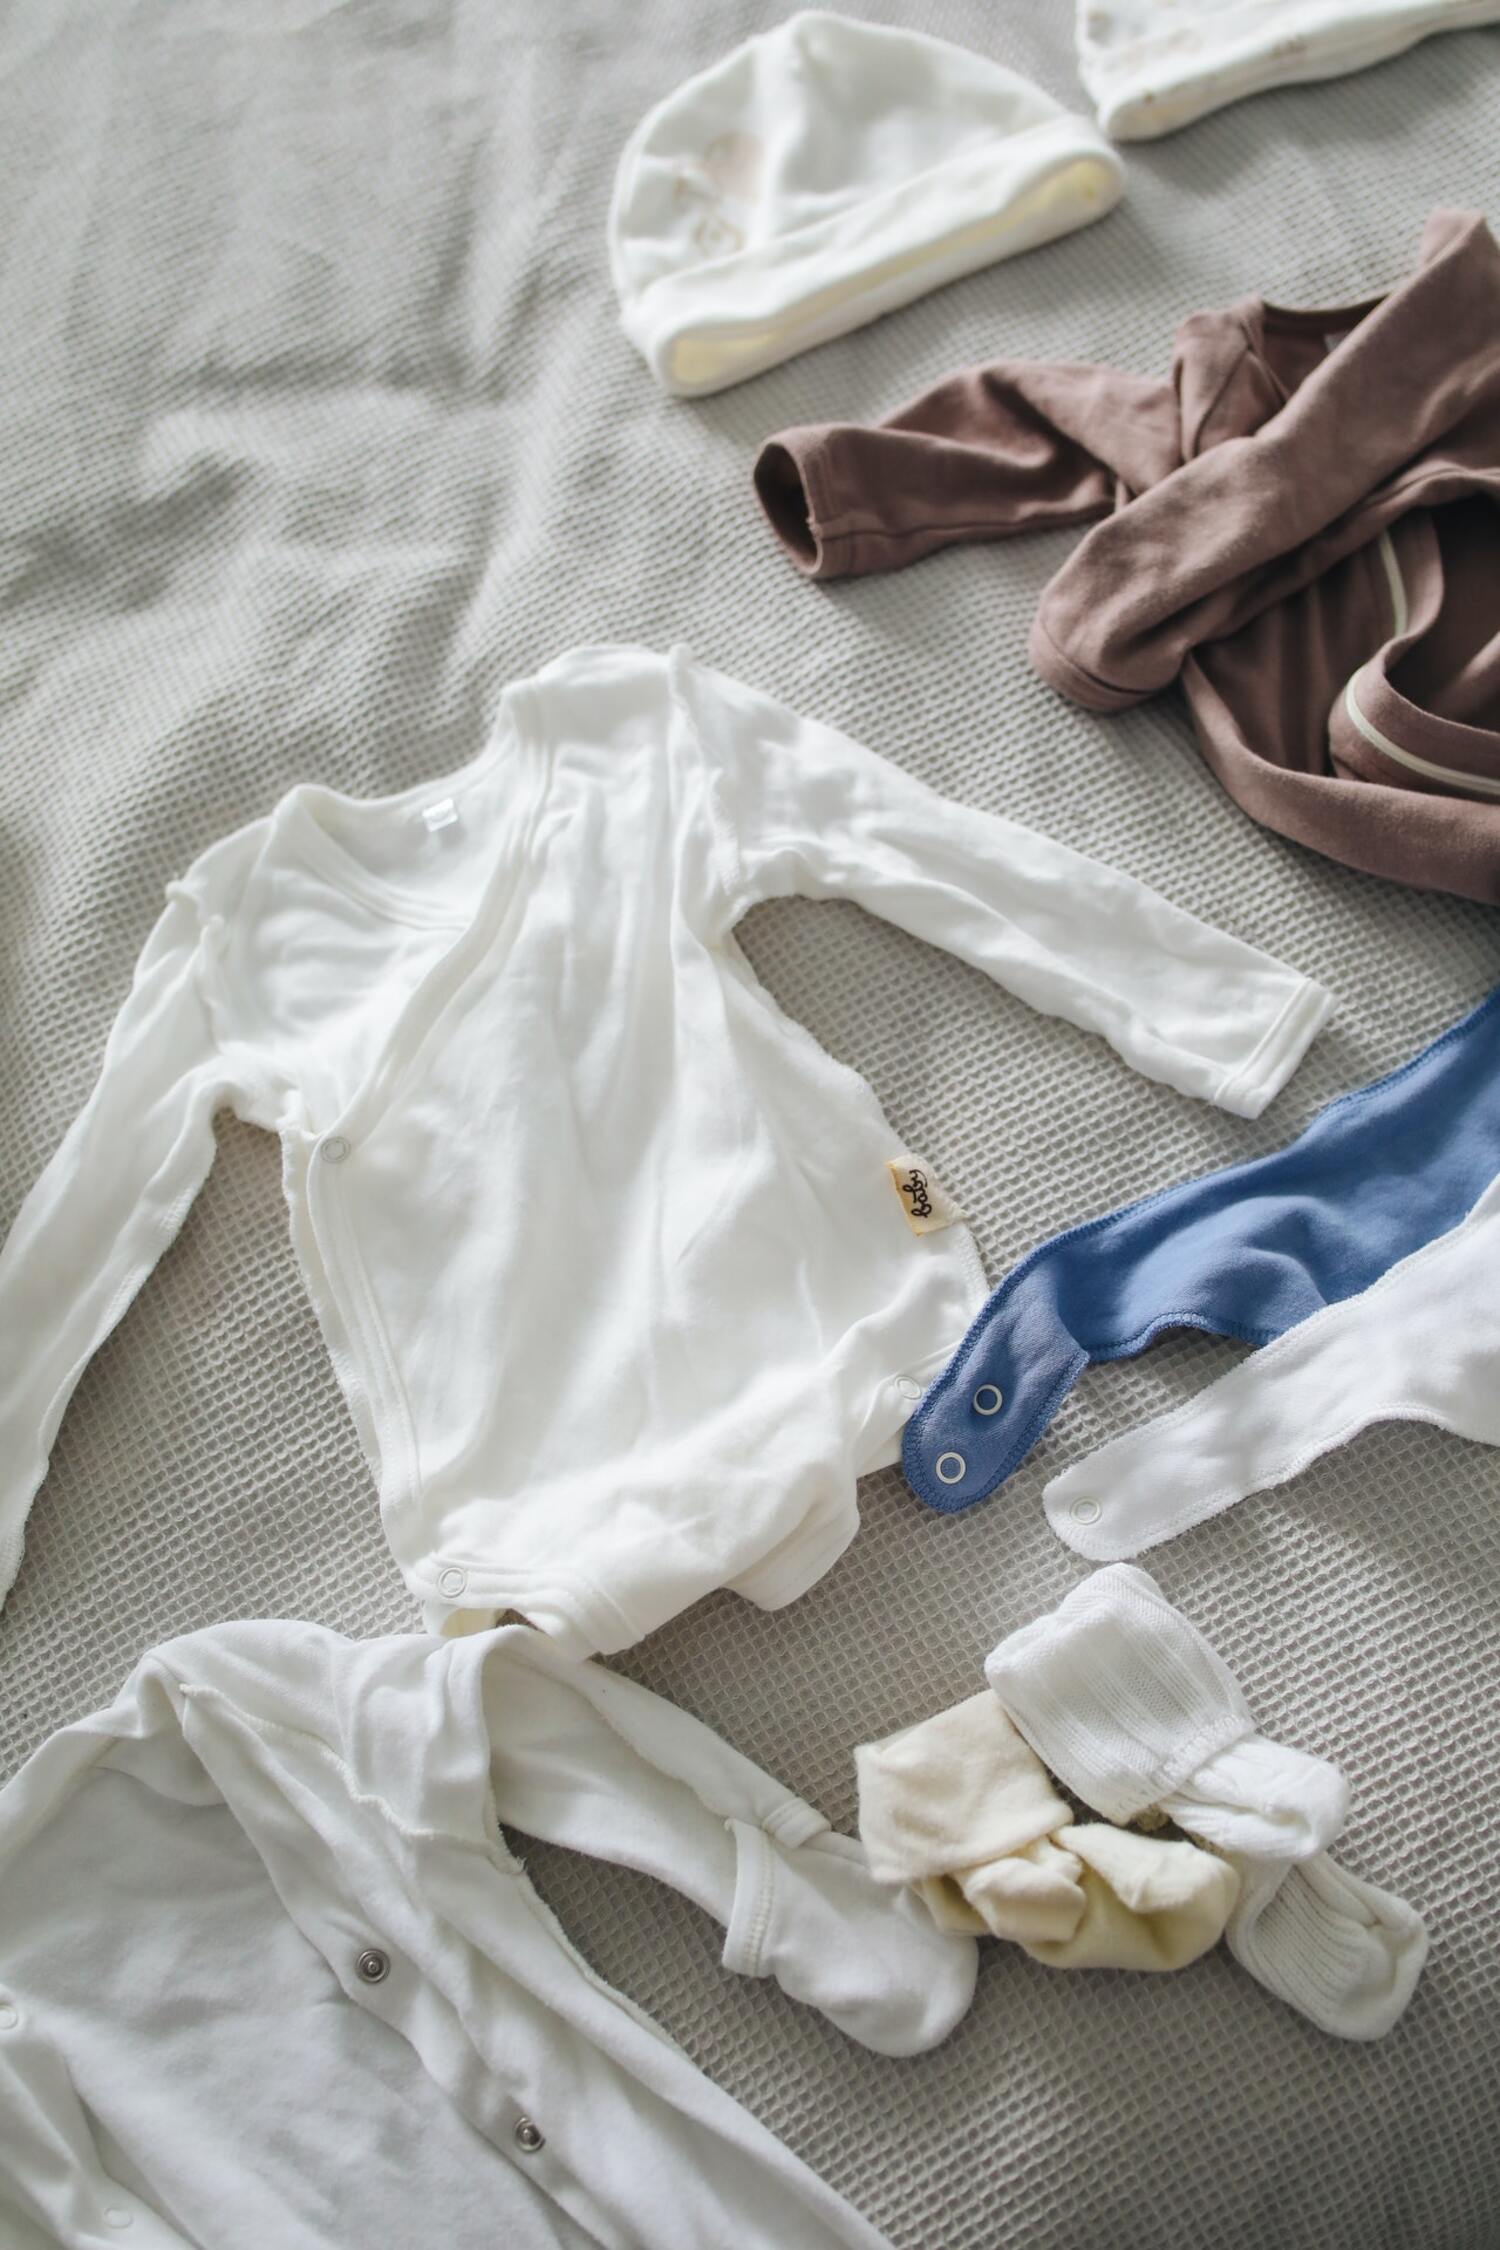 Baby clothes laying on a bed.